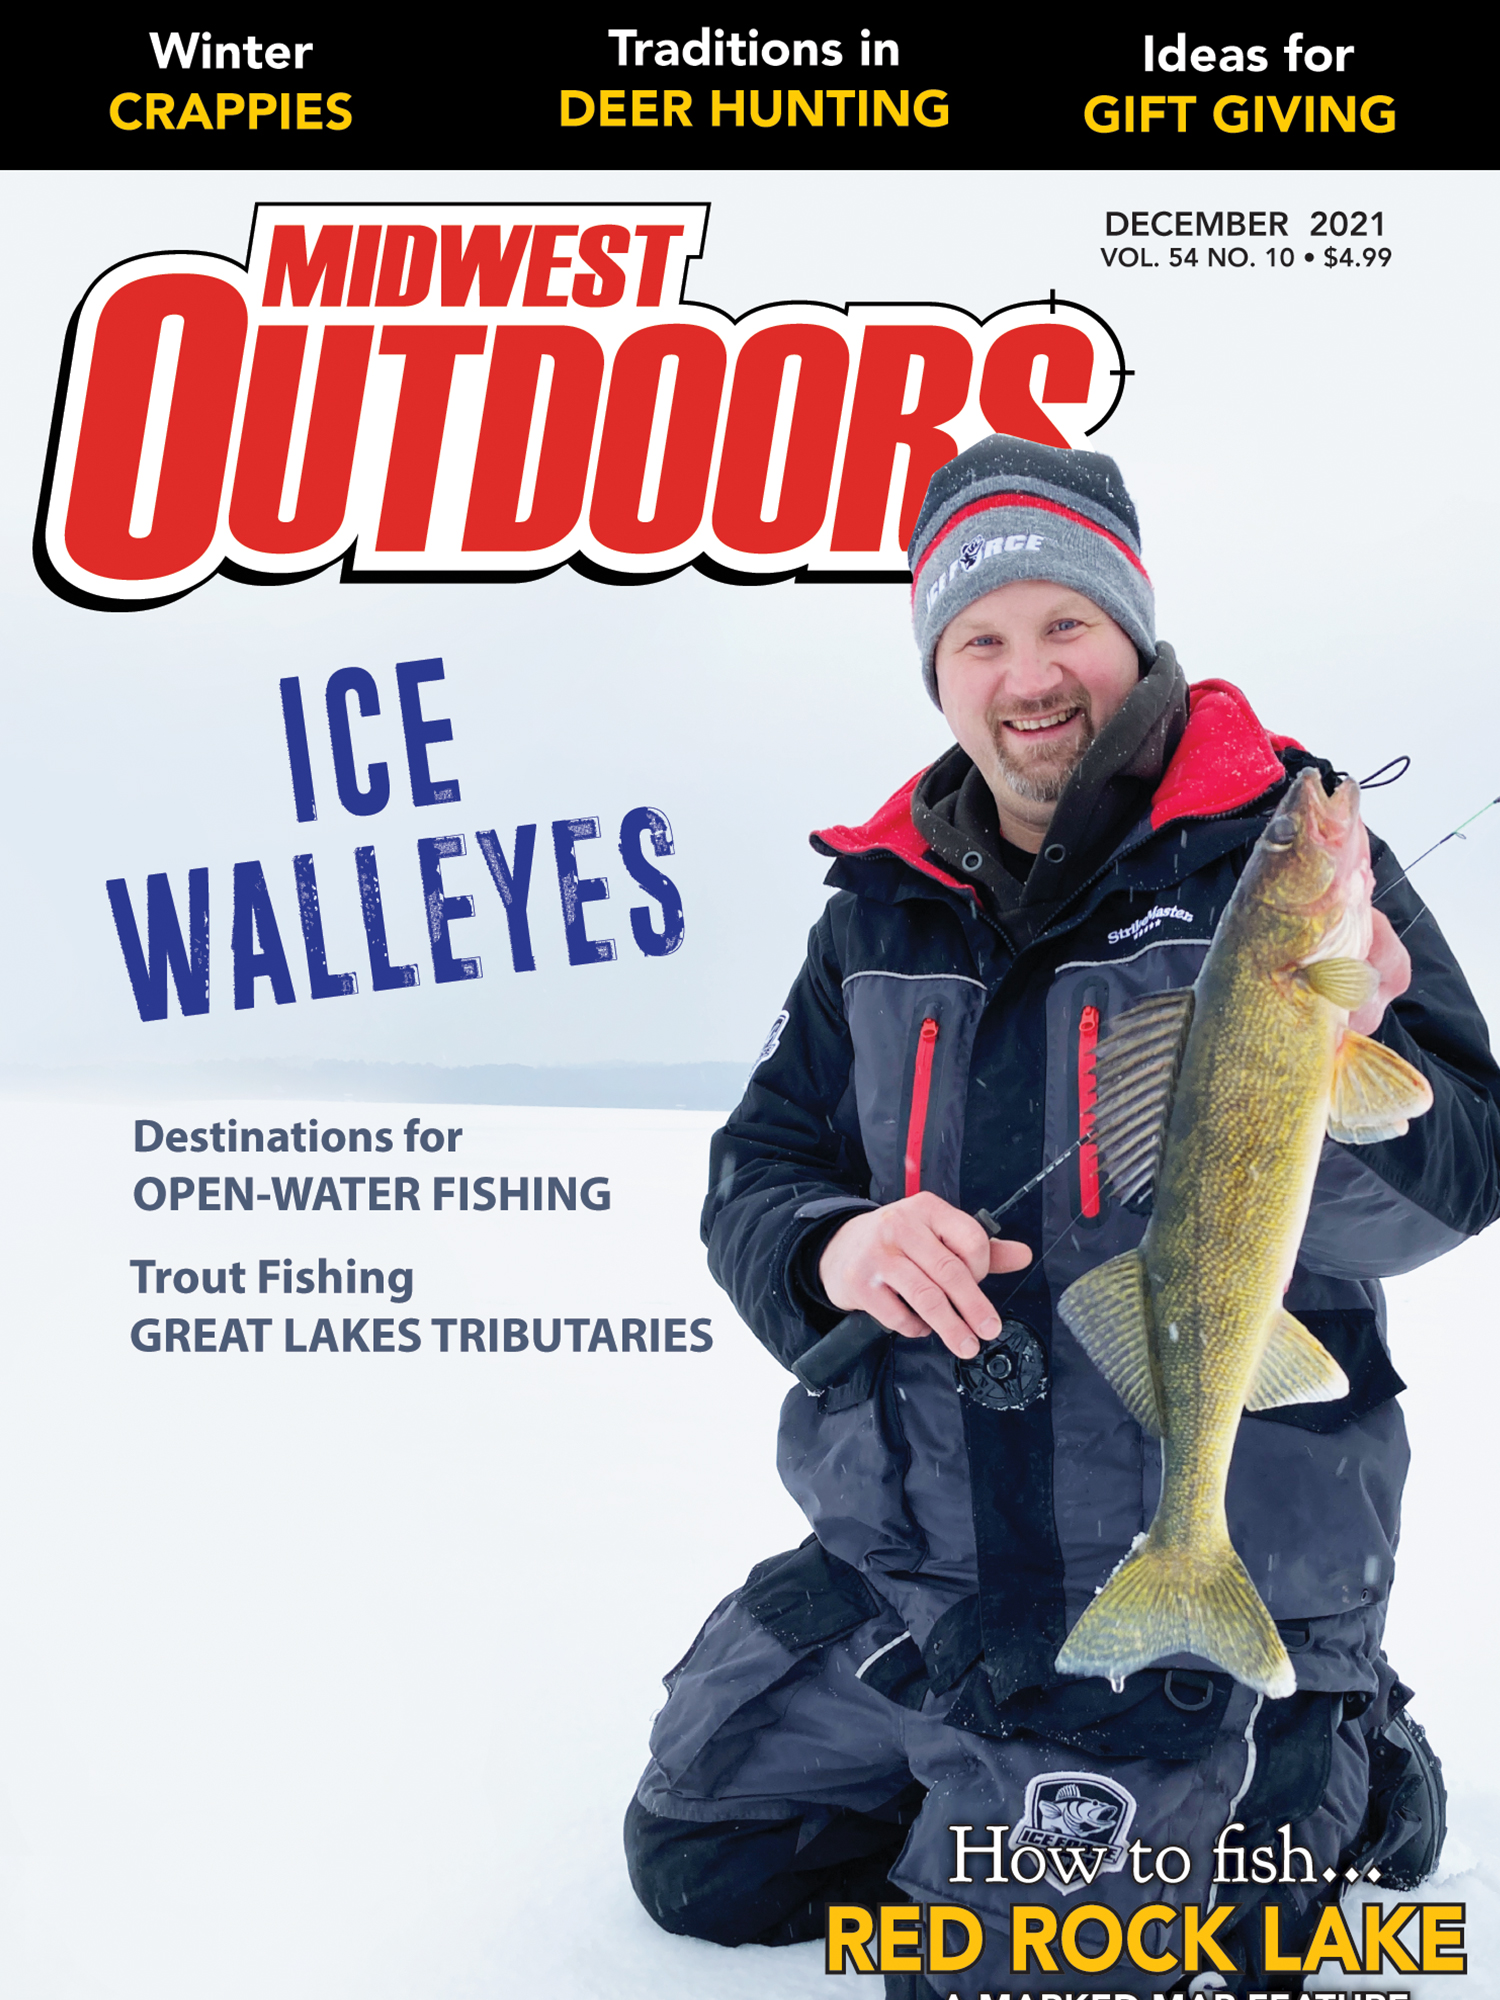 midwest-outdoors-the-1-outdoors-magazine-in-the-midwest-since-1967